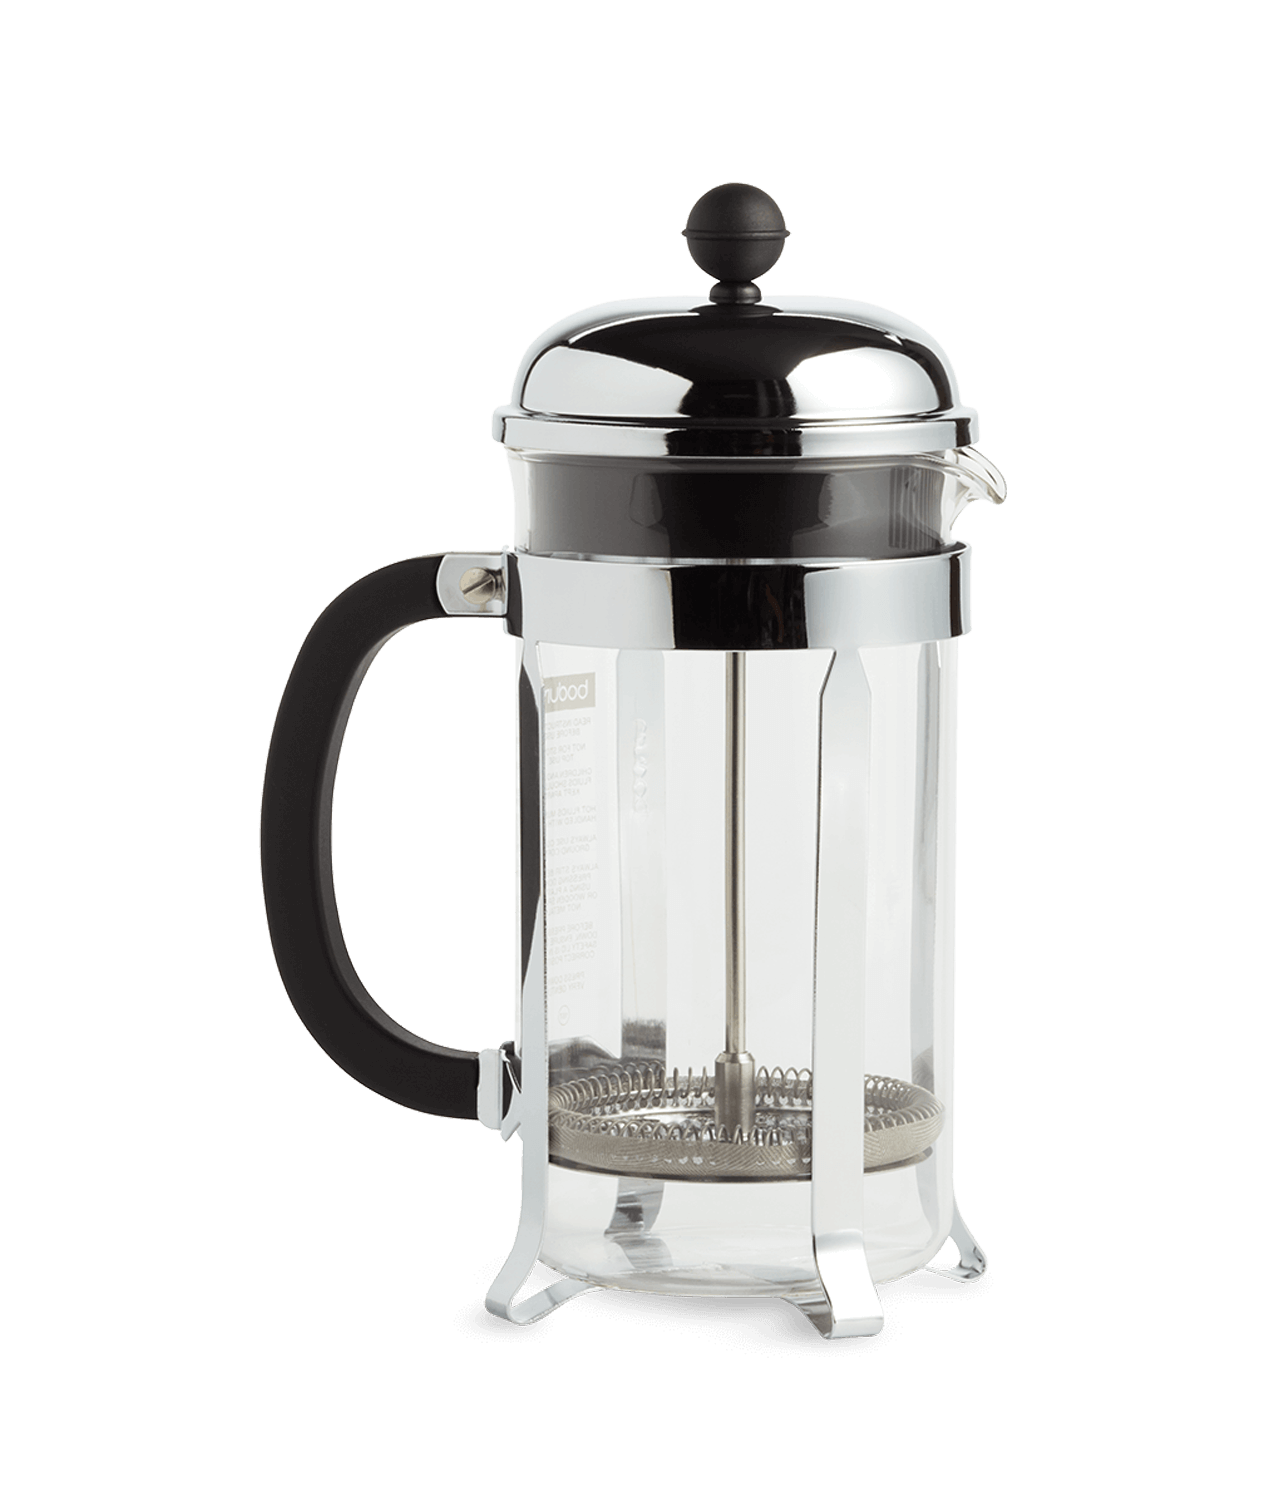 Peets Coffee Asobu P-cup Cold Brewer 